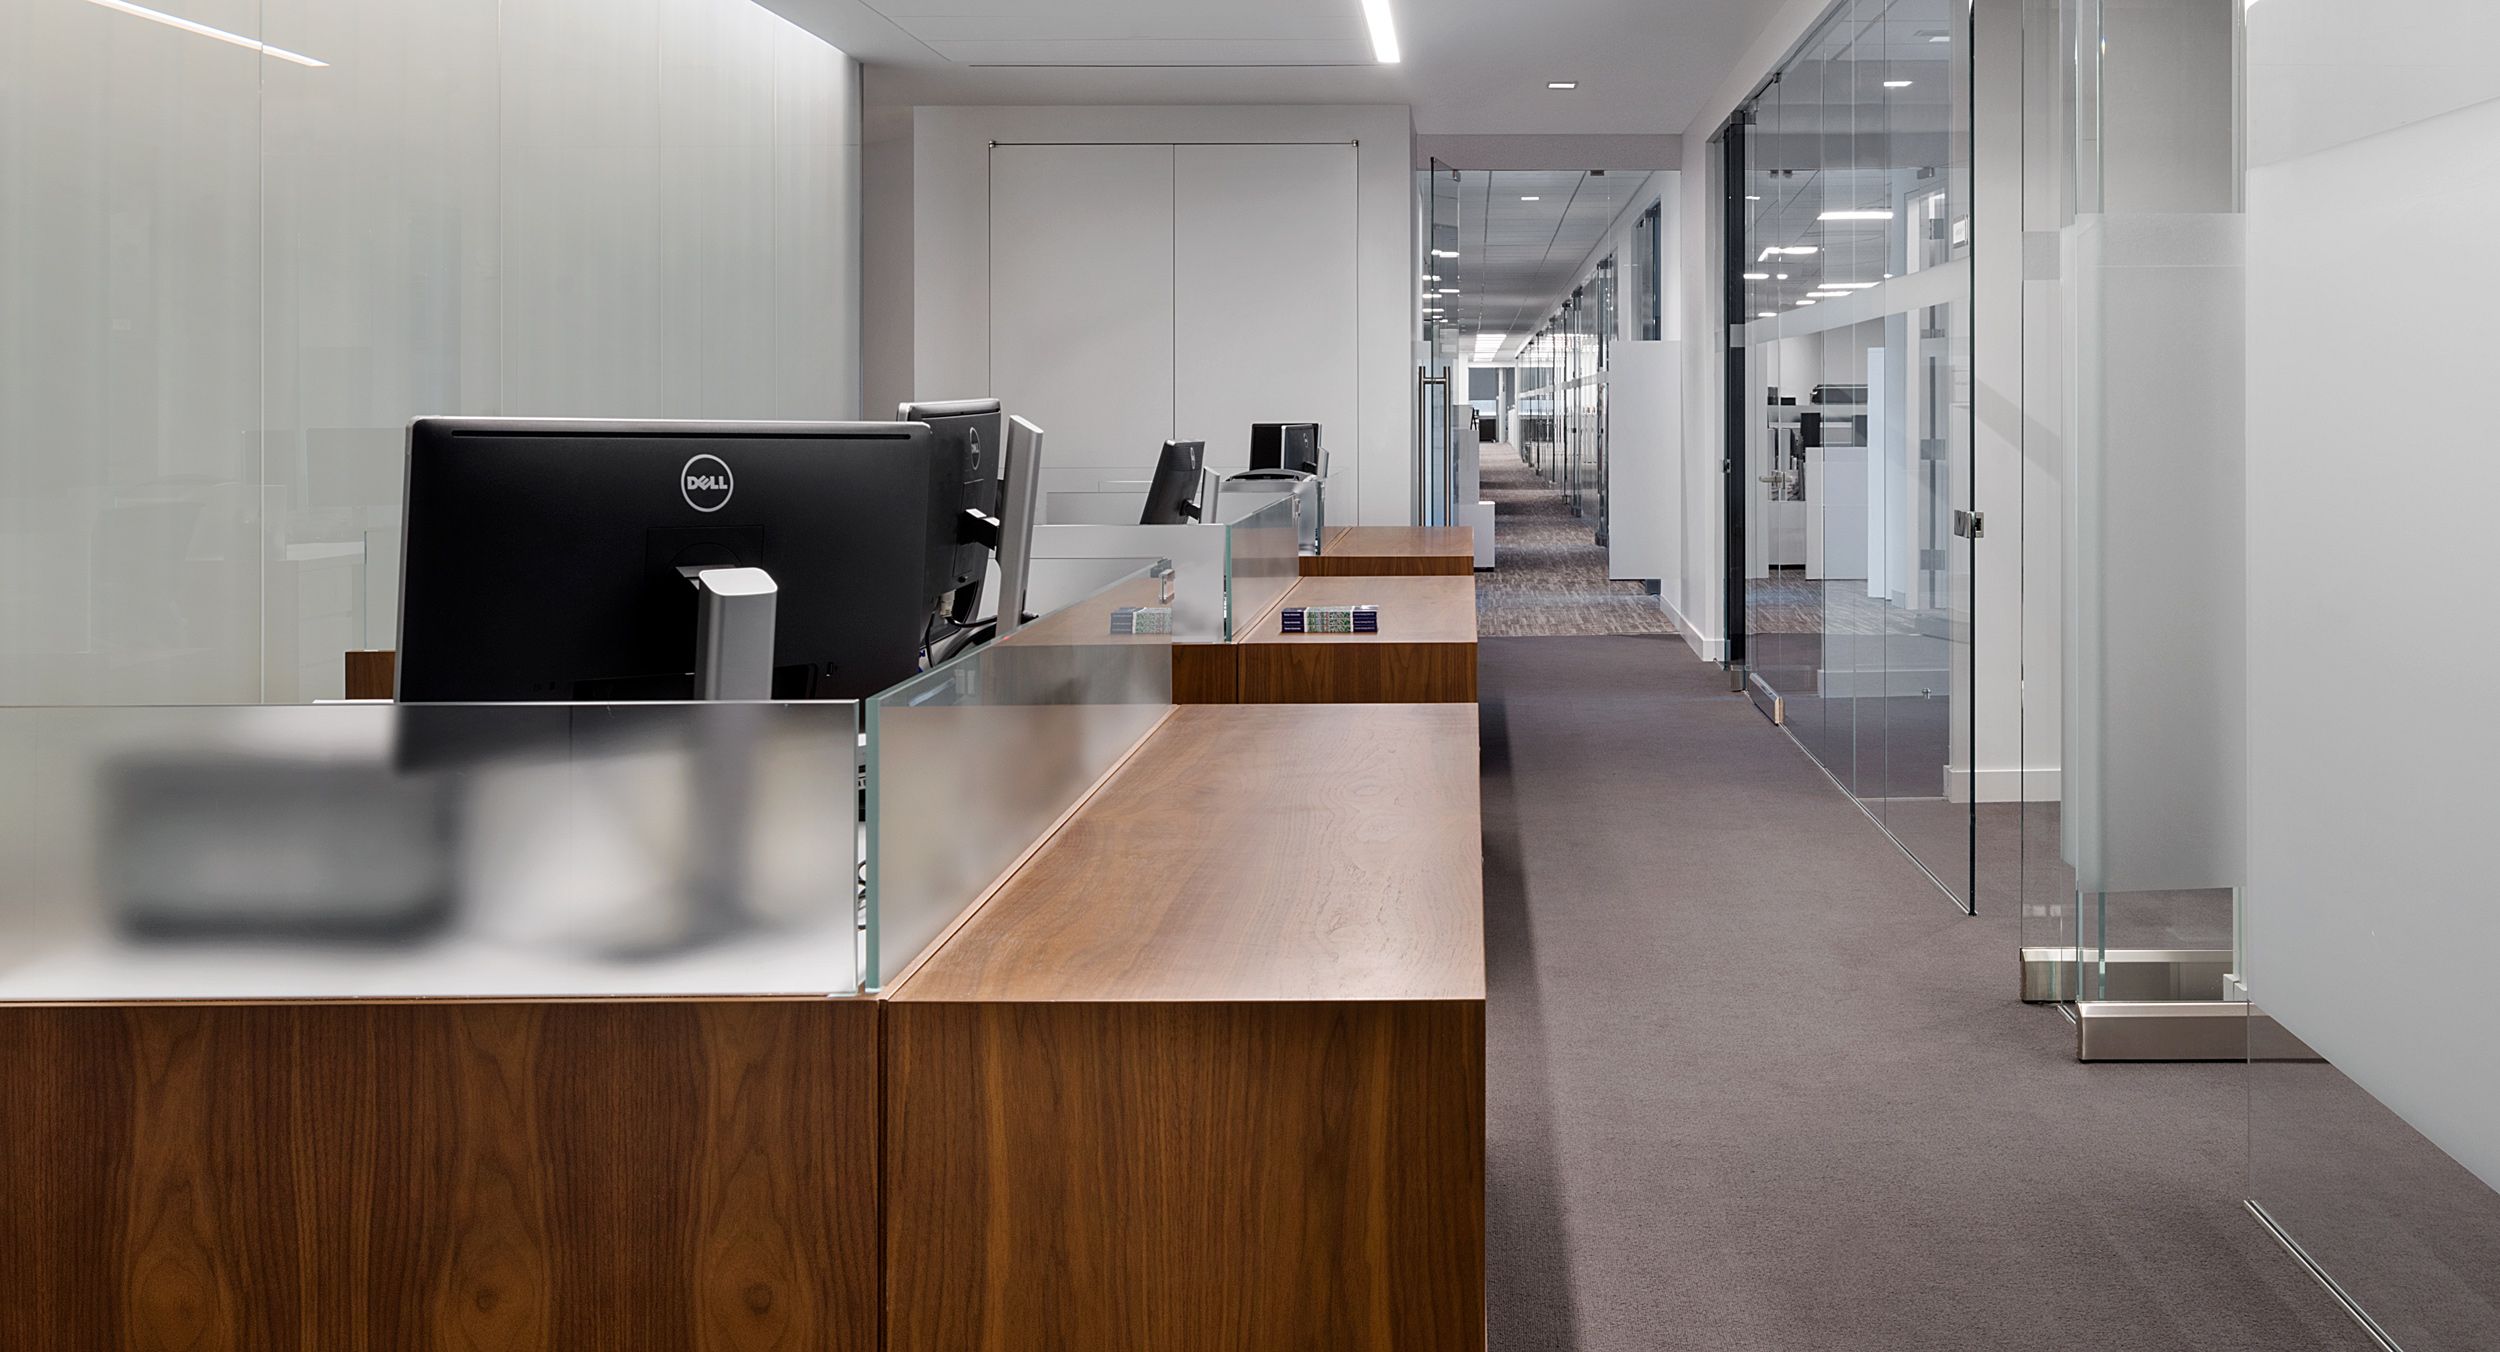 Open office workstations were provided in Flat Cut Walnut and etched glass.